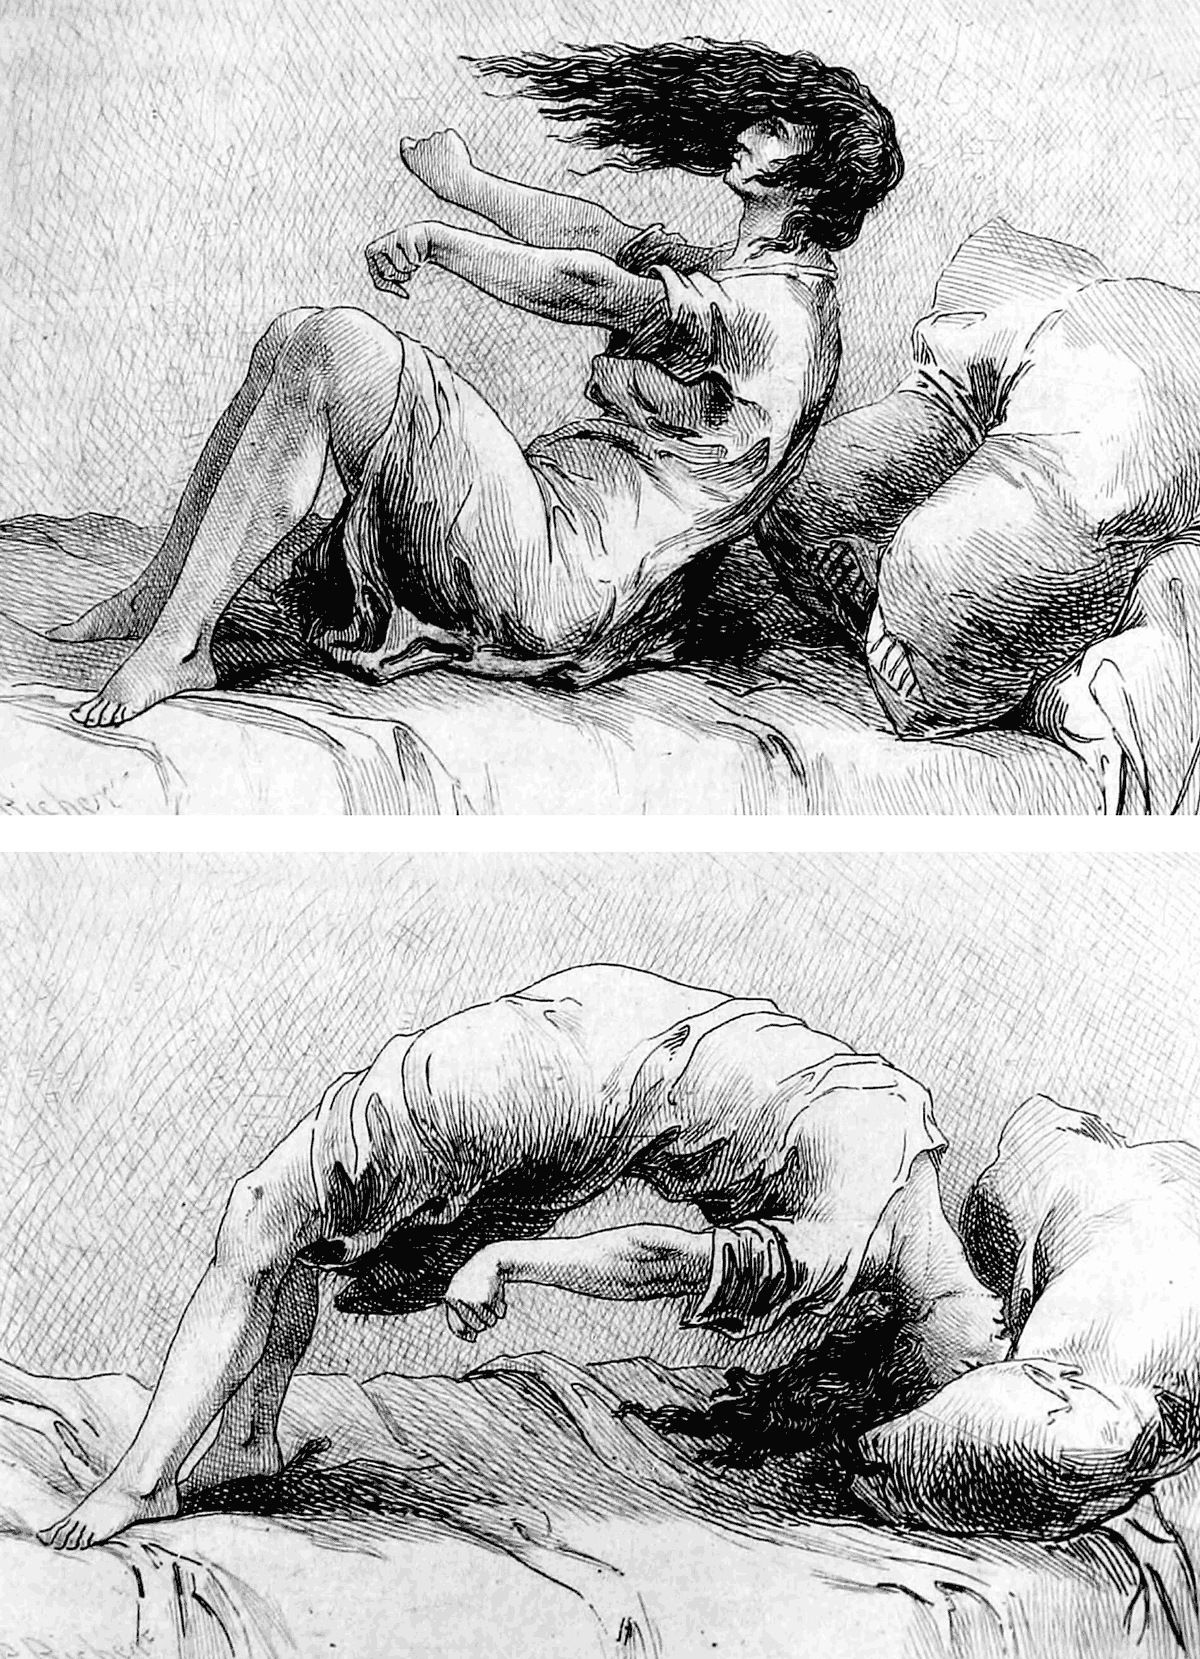 Two illustrations of a writhing hysteric in bed displaying the arc de cercle, from Paul Richer’s eighteen eighty-one work titled “Études cliniques sur l’hystéro-épilepsie, ou Grande hystérie”. French neurologist Jean-Martin Charcot, who named the pose, placed it within the “clownism” phase of his schema for how a hysterical attack proceeds. 